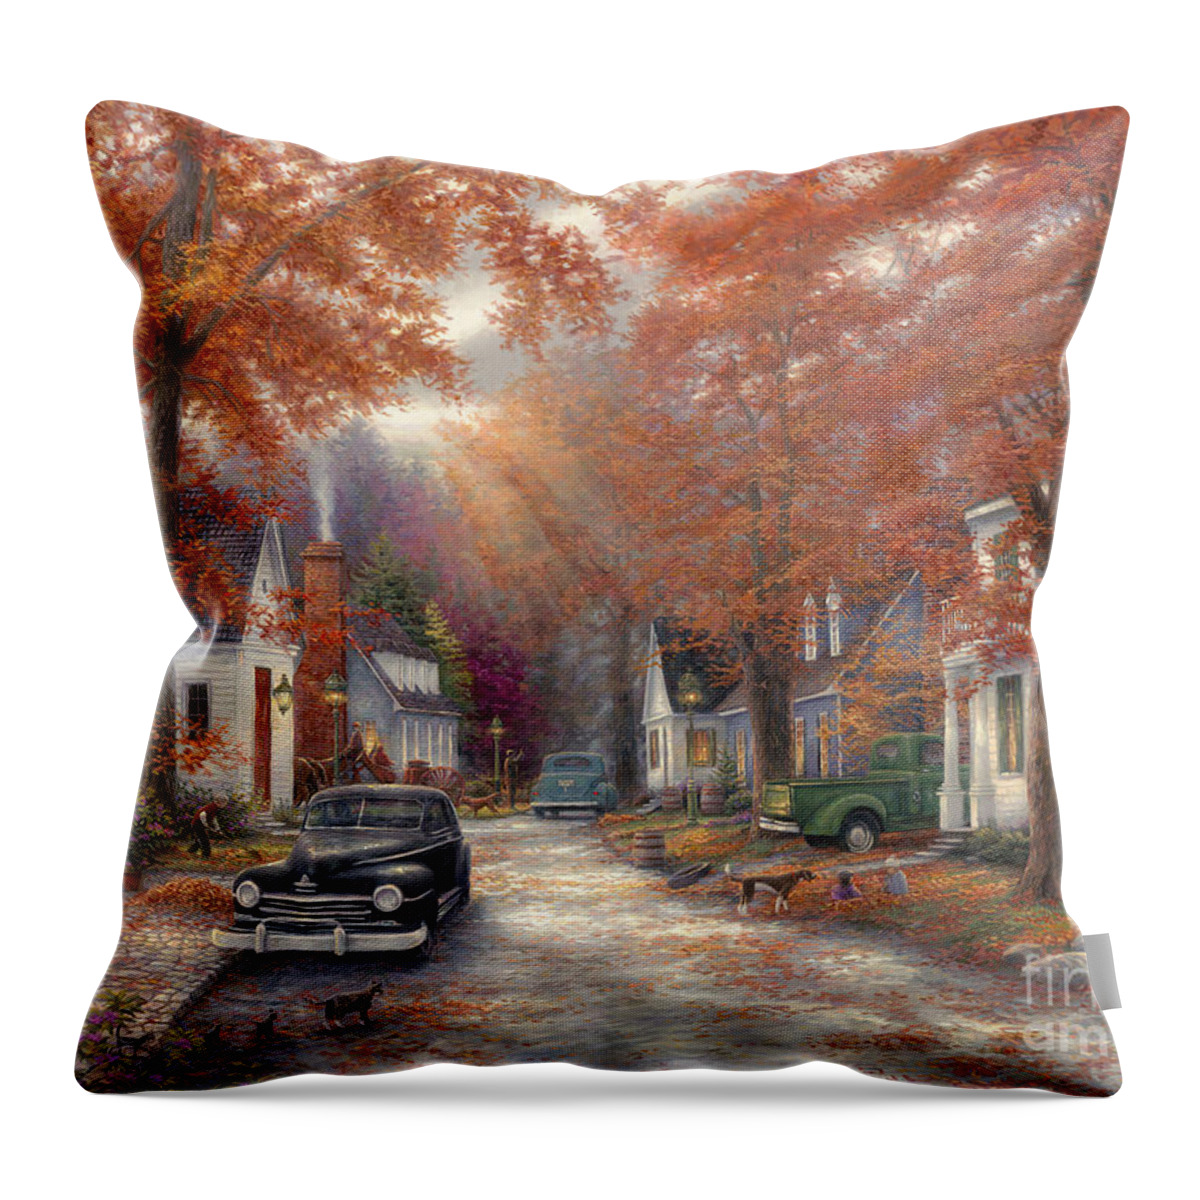 Americana Throw Pillow featuring the painting A Moment On Memory Lane by Chuck Pinson